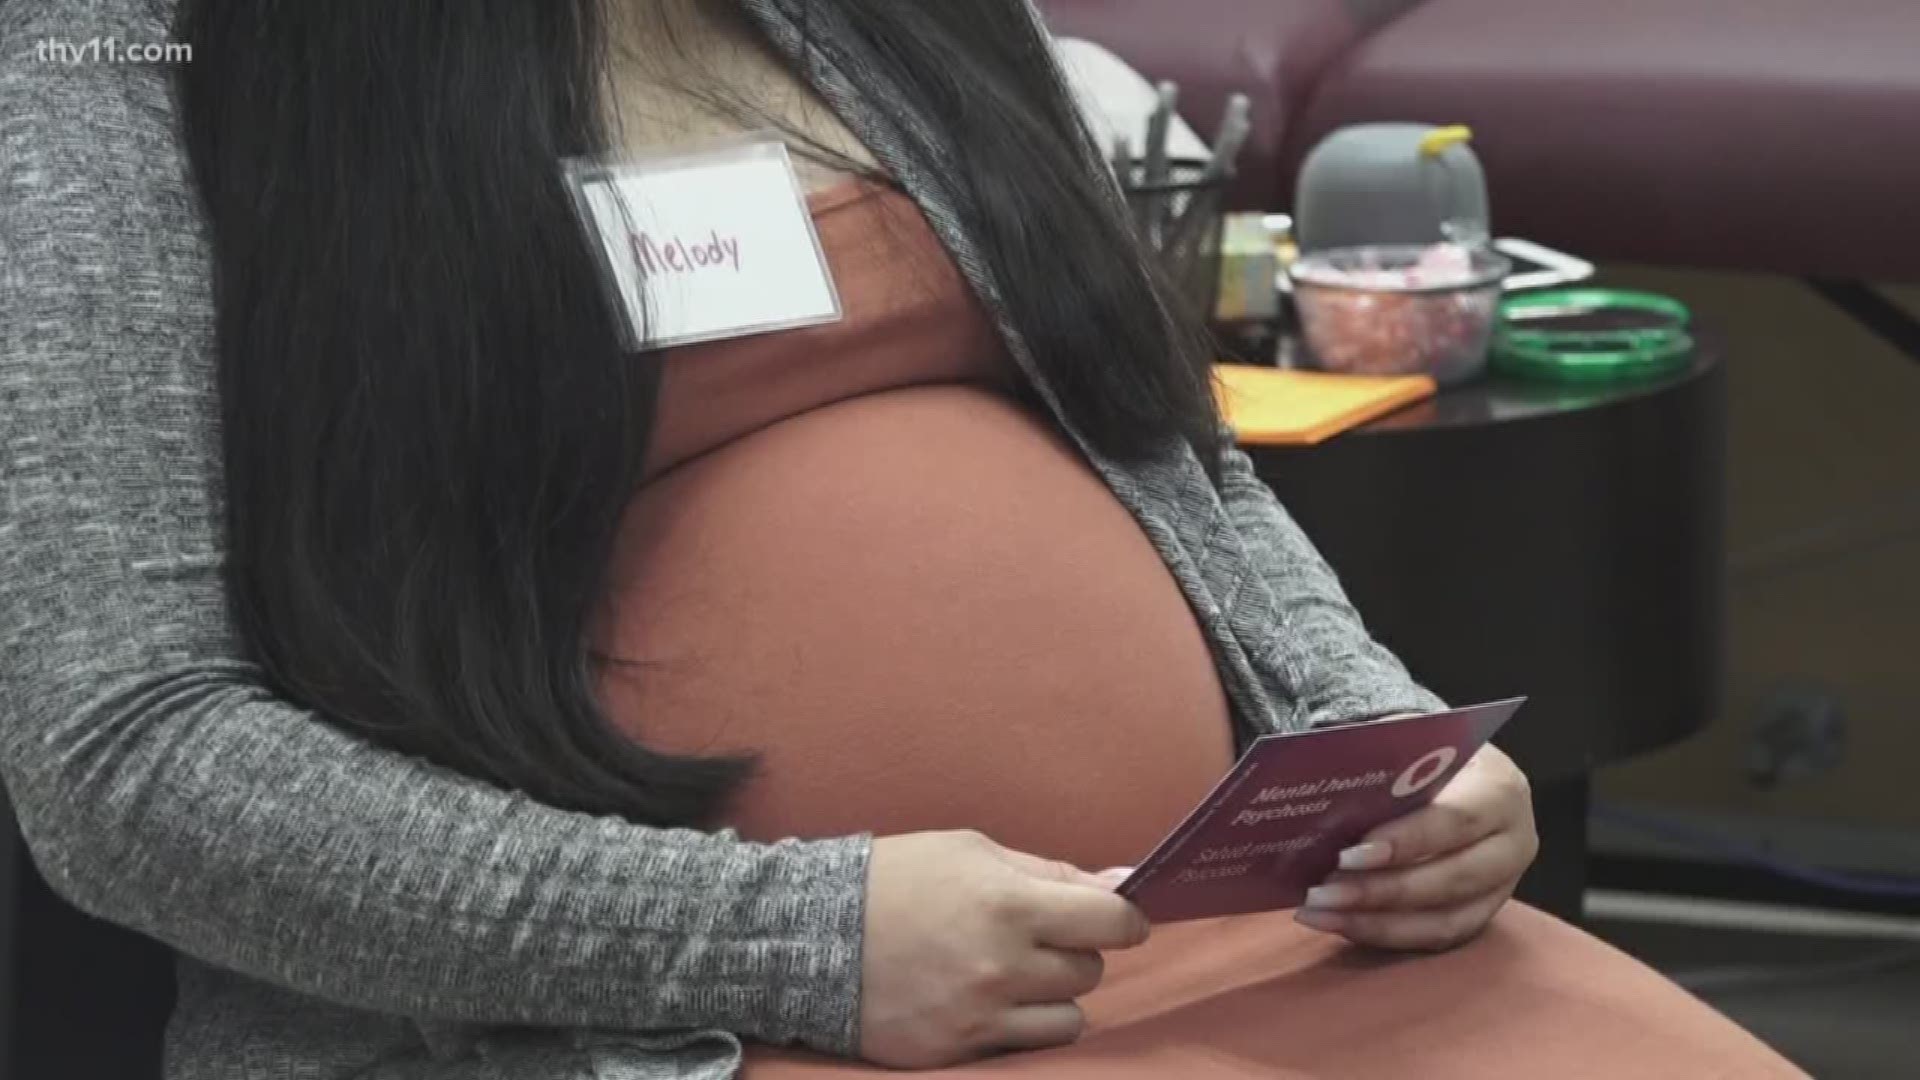 Nearly 75 women have completed the UAMS CenteringPregnancy program in the last year. Compared to women who did not go through the program, women who were in the program saw improvements in things like increased breastfeeding, decreased health disparities, fewer cases of babies with low birth weight and less premature births.